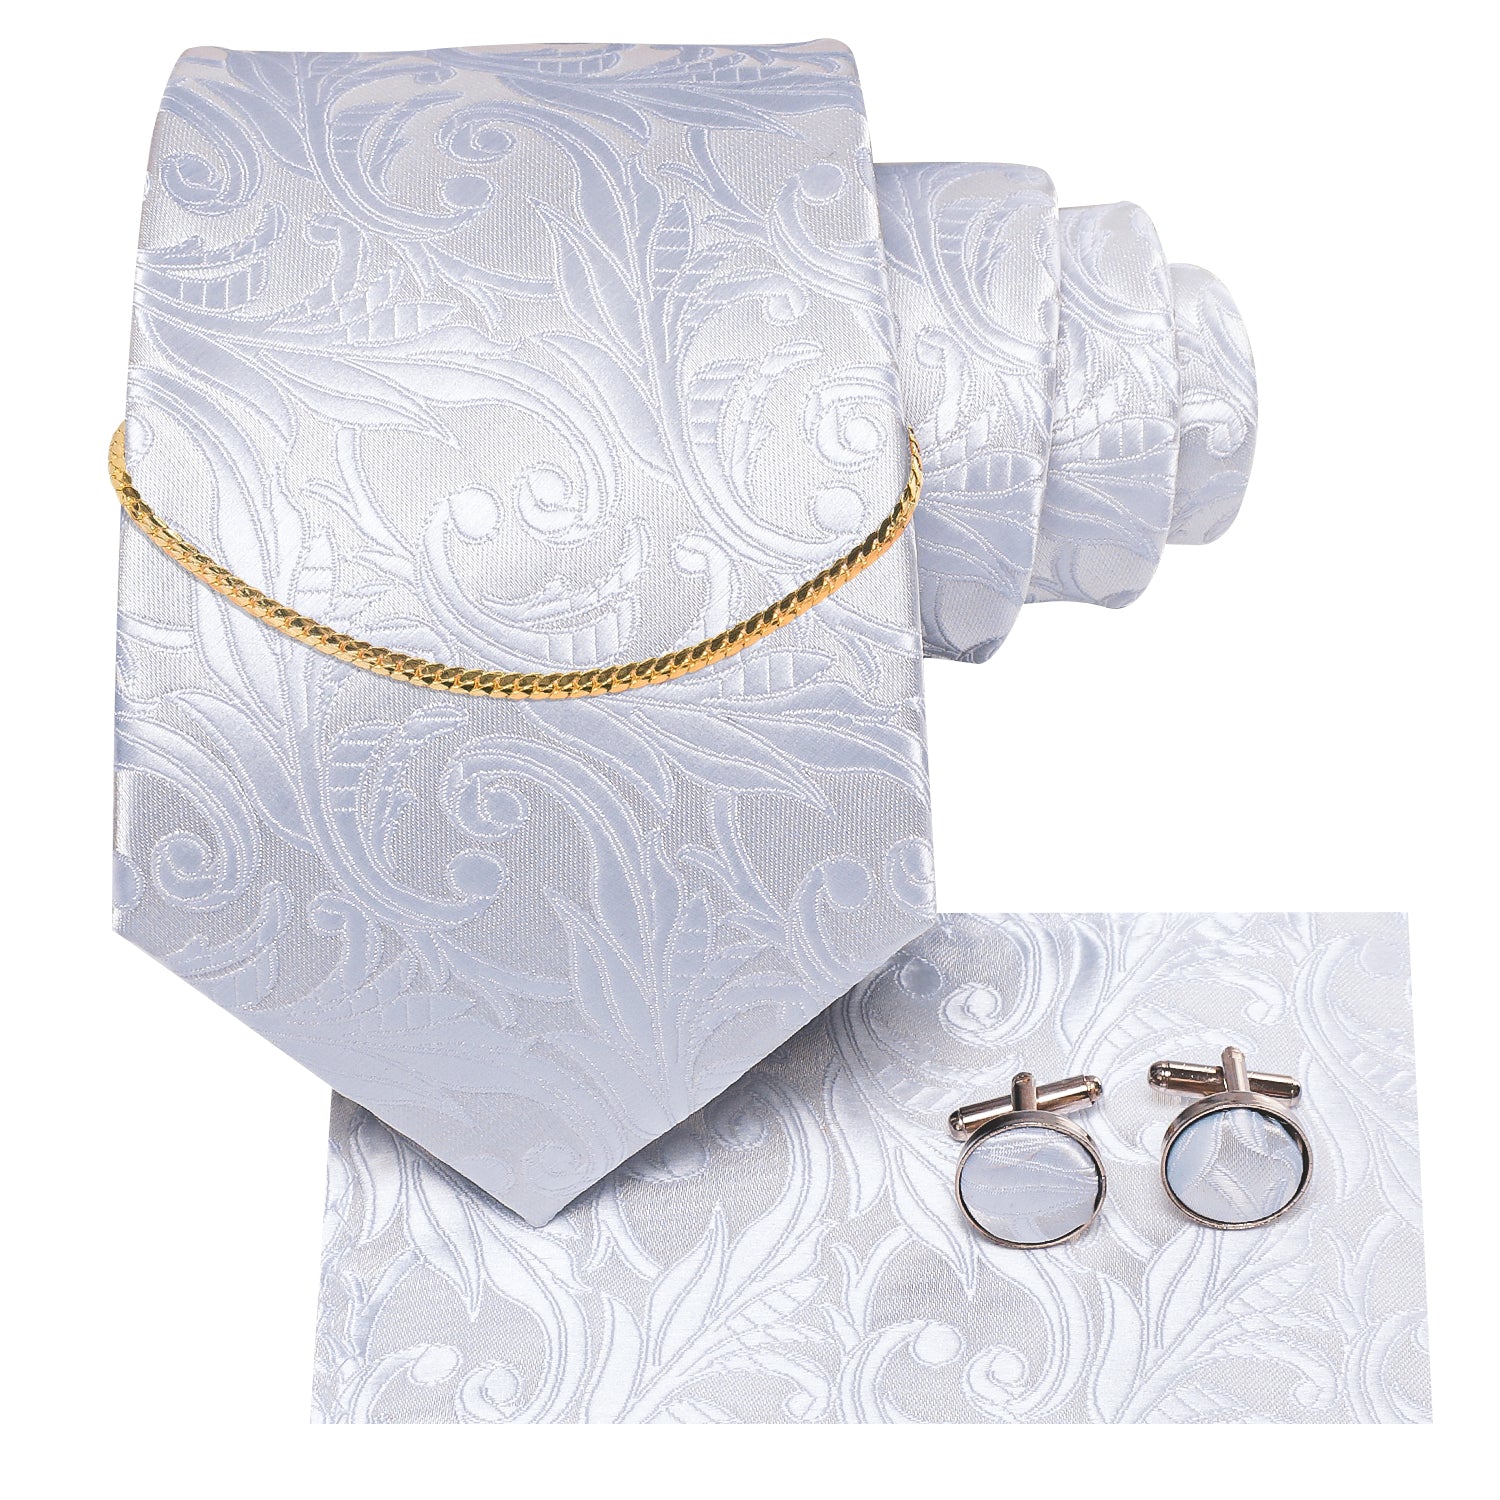 White Floral Tie Pocket Square Cufflinks Set With Golden Chain